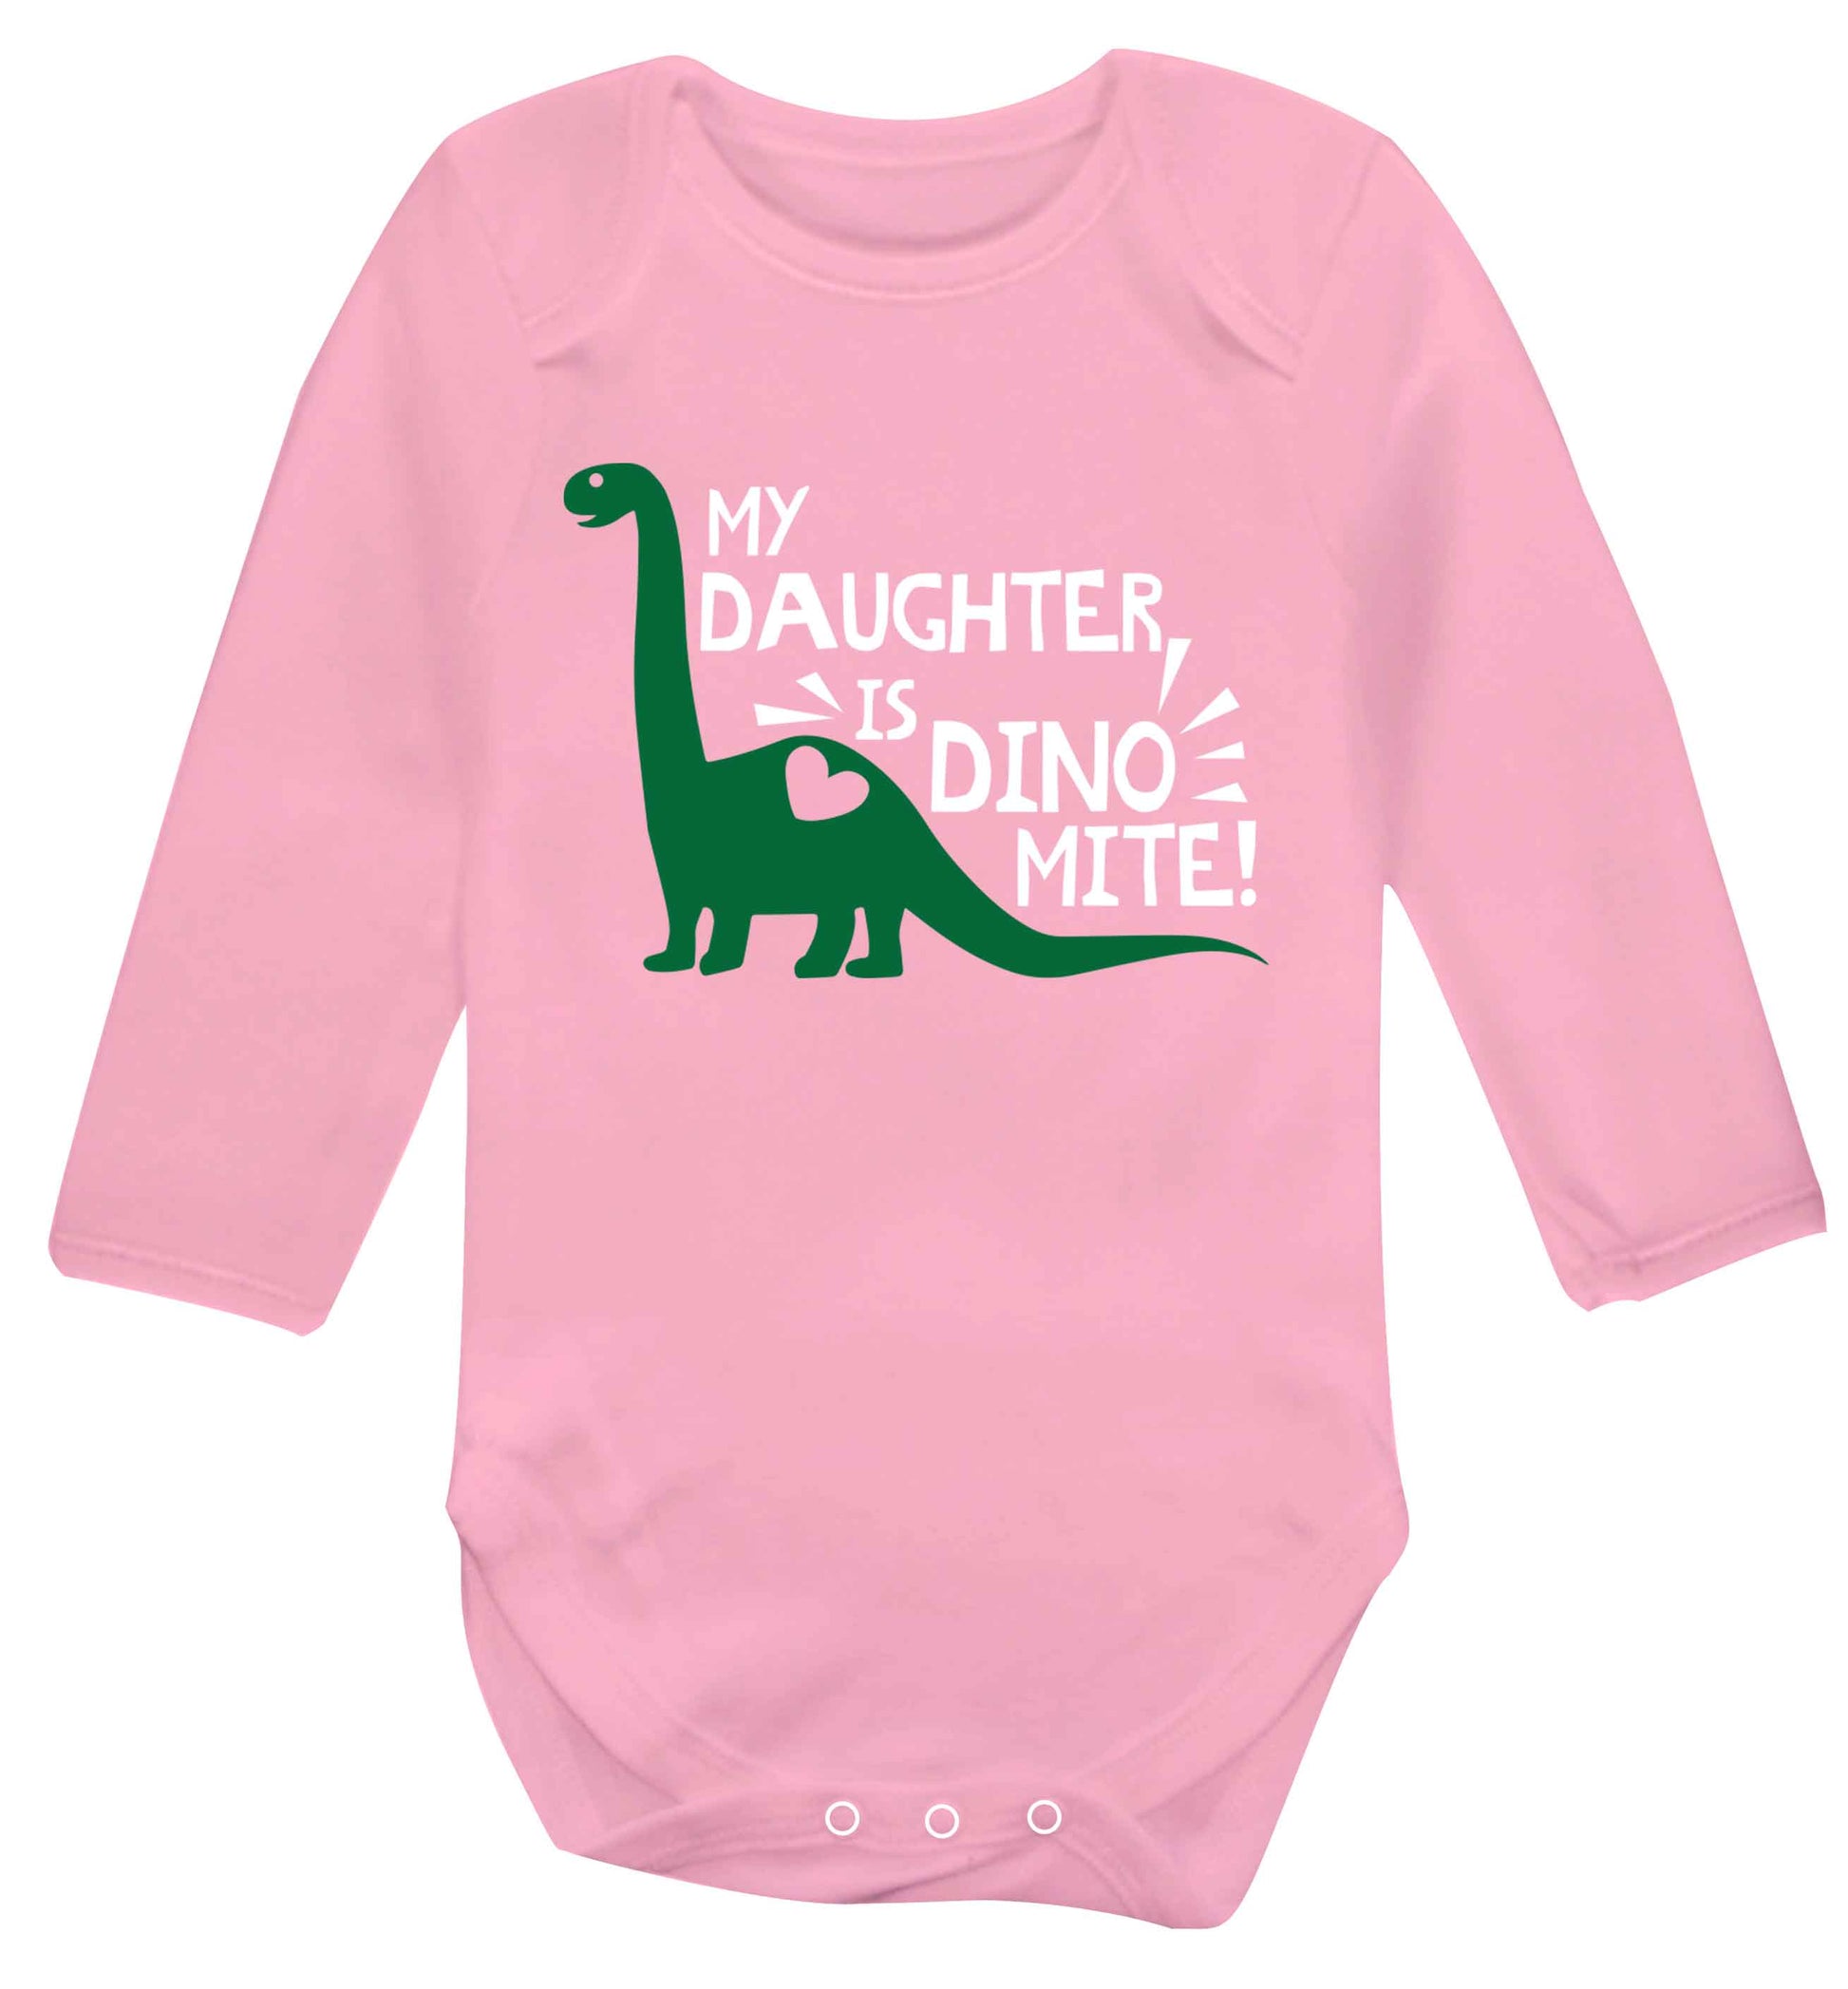 My daughter is dinomite! Baby Vest long sleeved pale pink 6-12 months